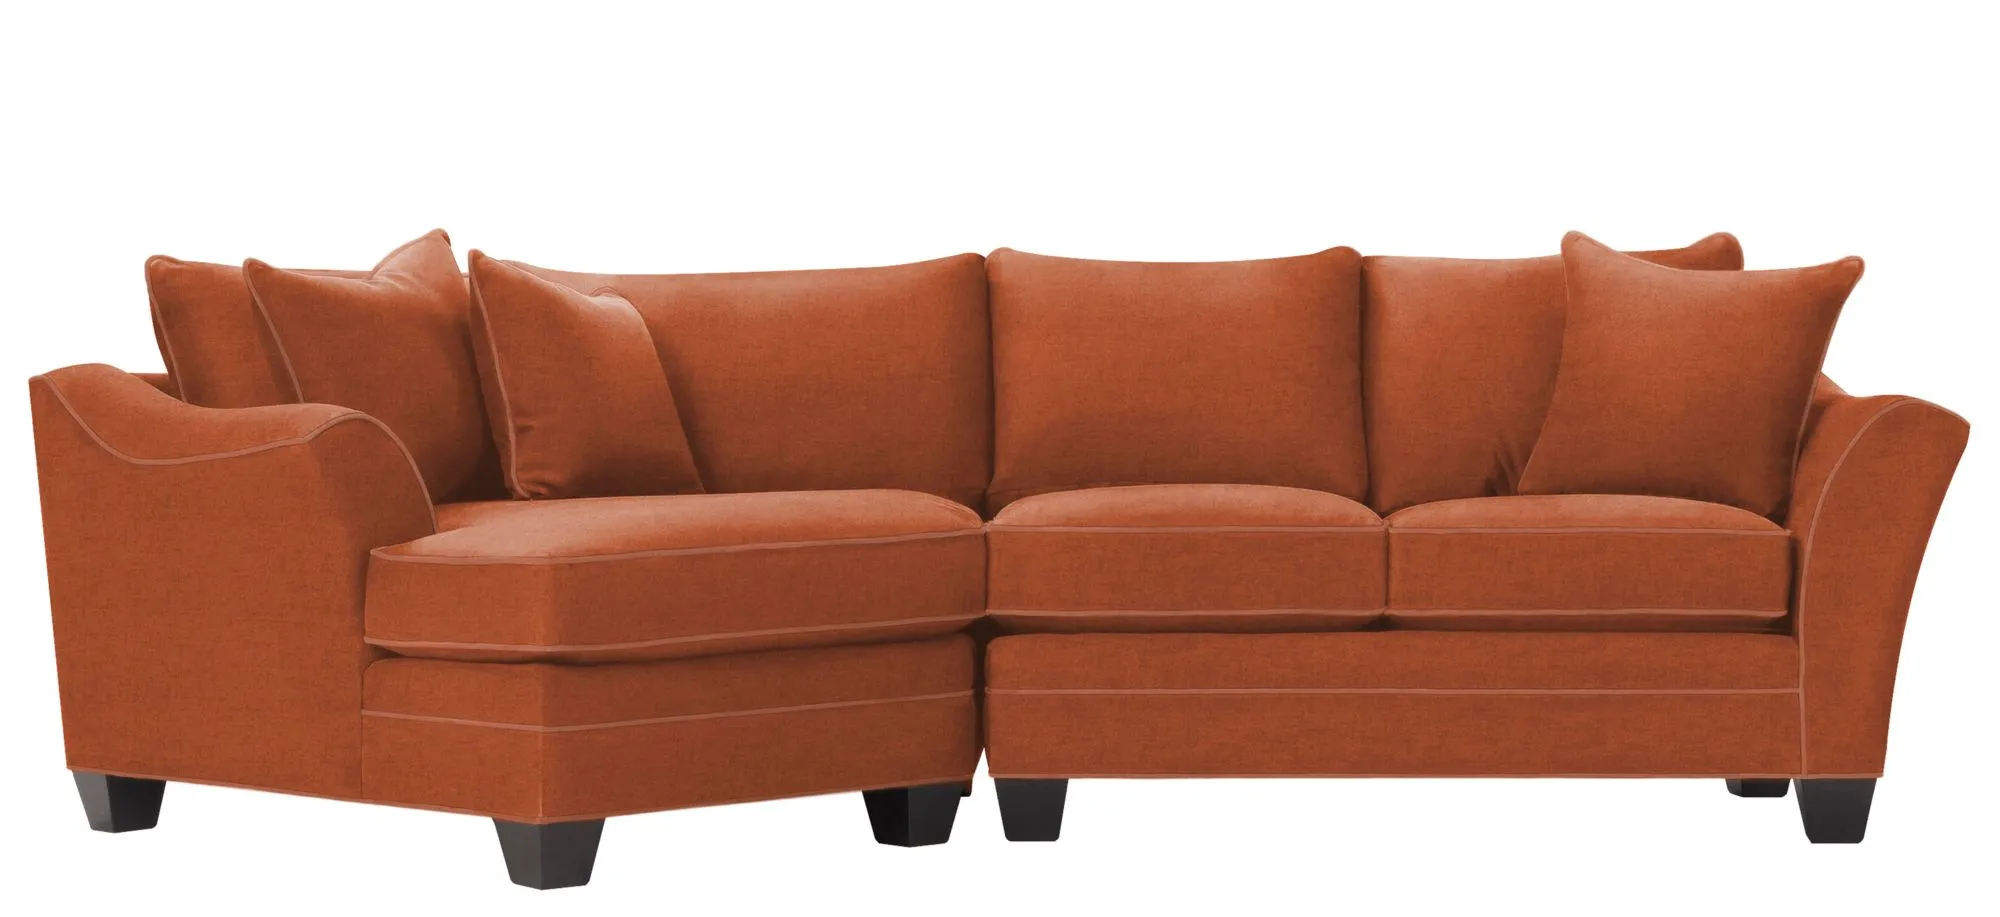 Foresthill 2-pc. Left Hand Cuddler Sectional Sofa in Santa Rosa Adobe by H.M. Richards